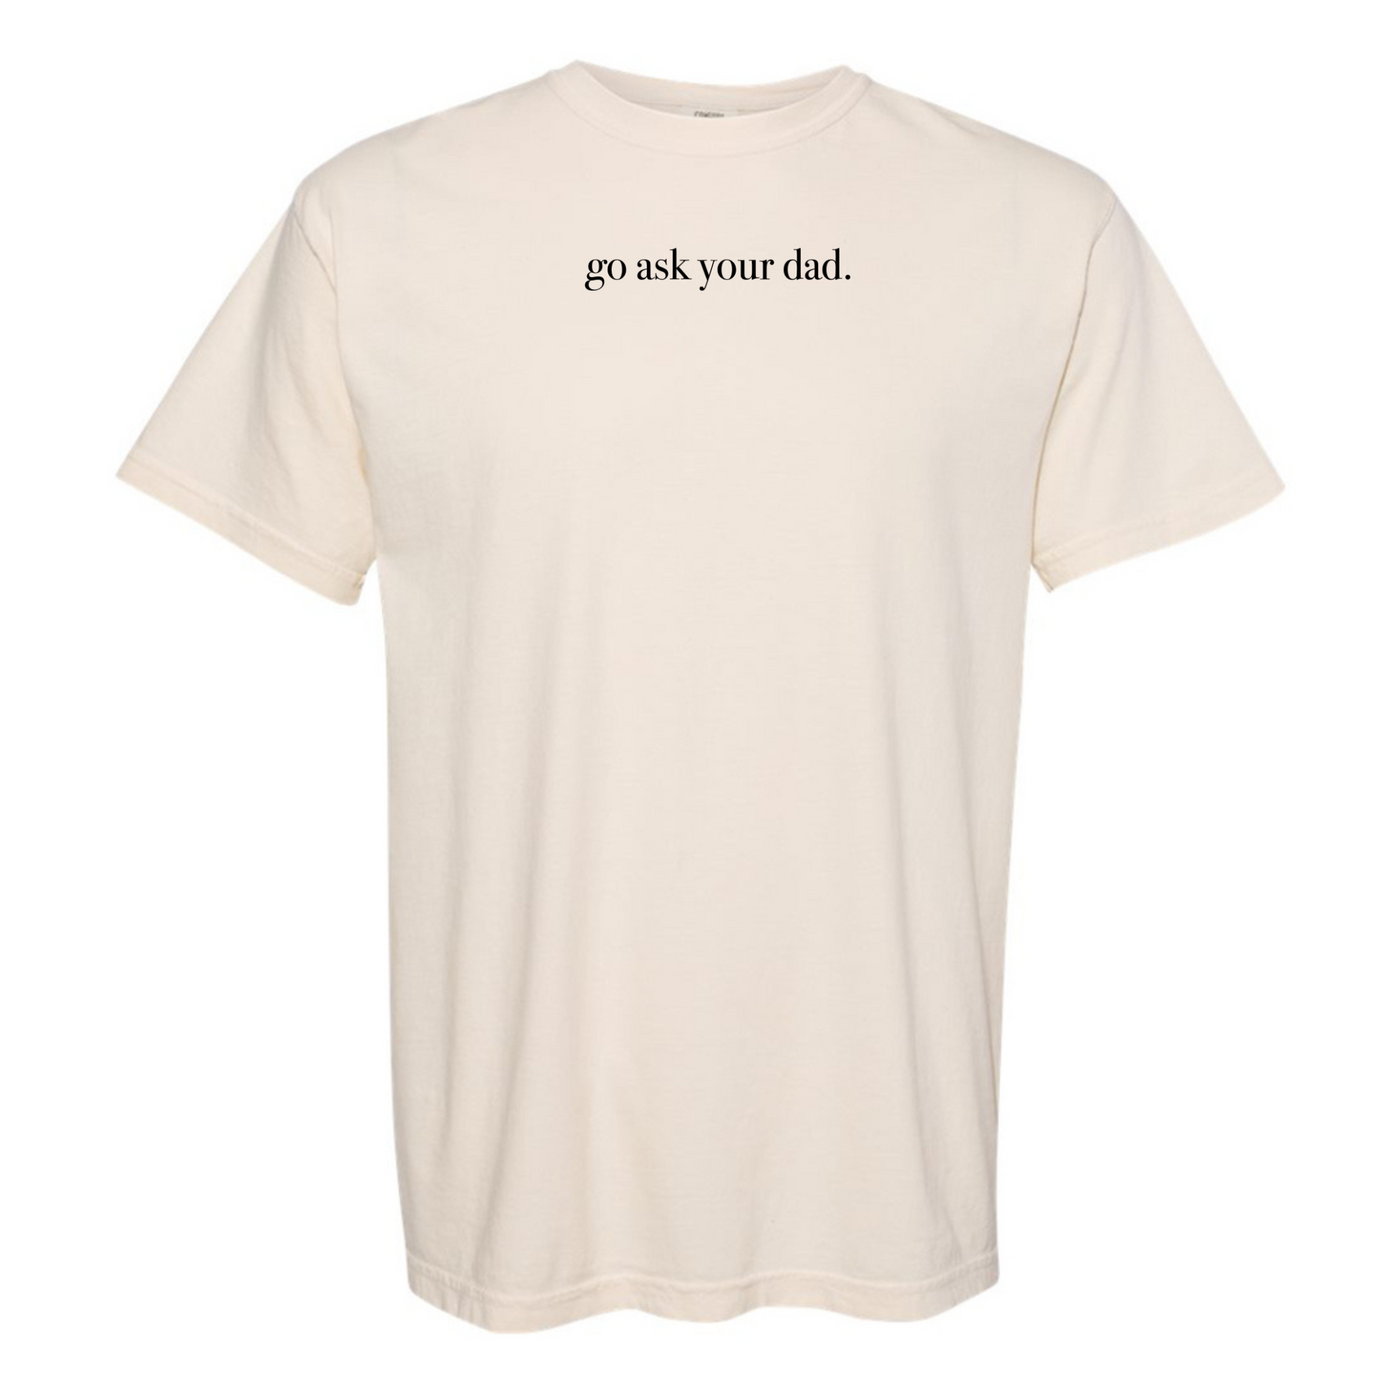 'Go Ask Your Dad' T-Shirt